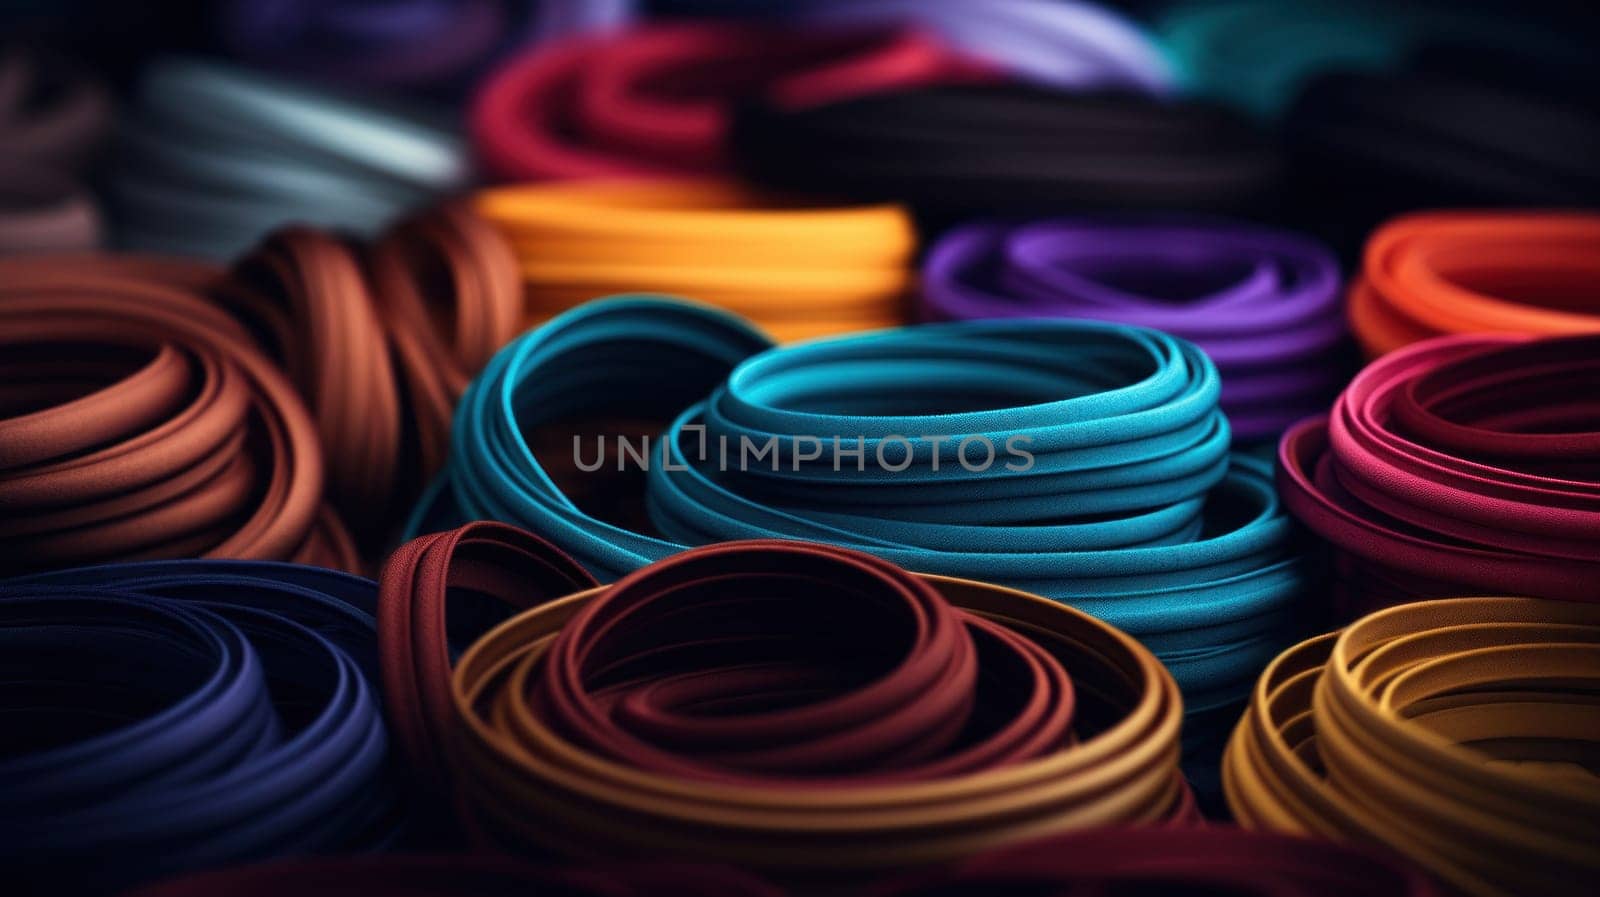 A pile of colorful rubber bands are stacked together